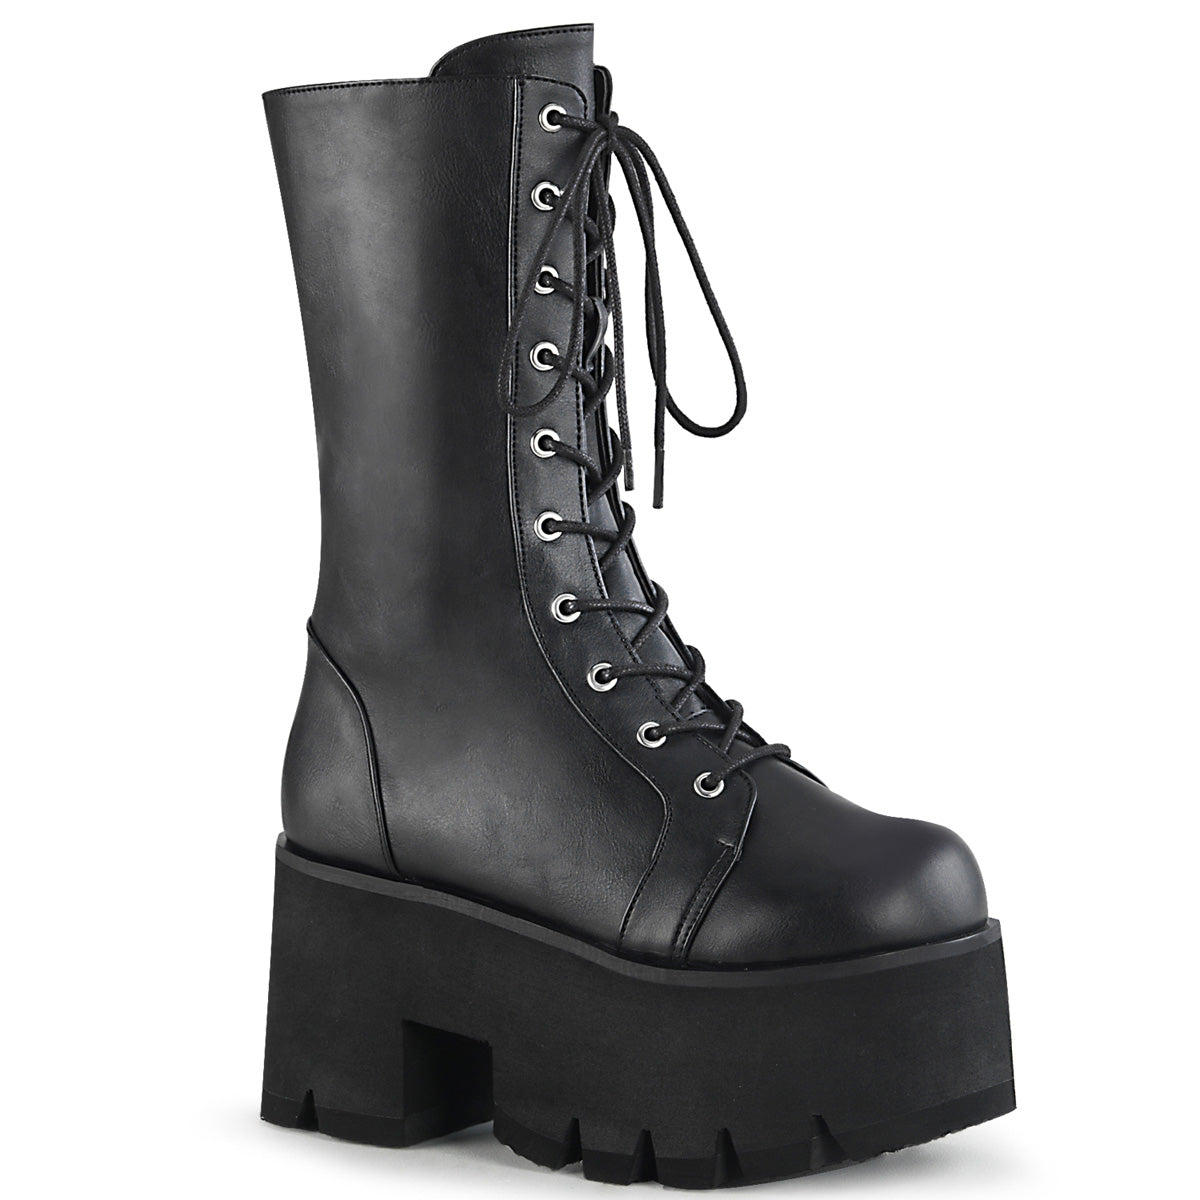 DemoniaCult Womens Boots ASHES-105 Blk Vegan Leather